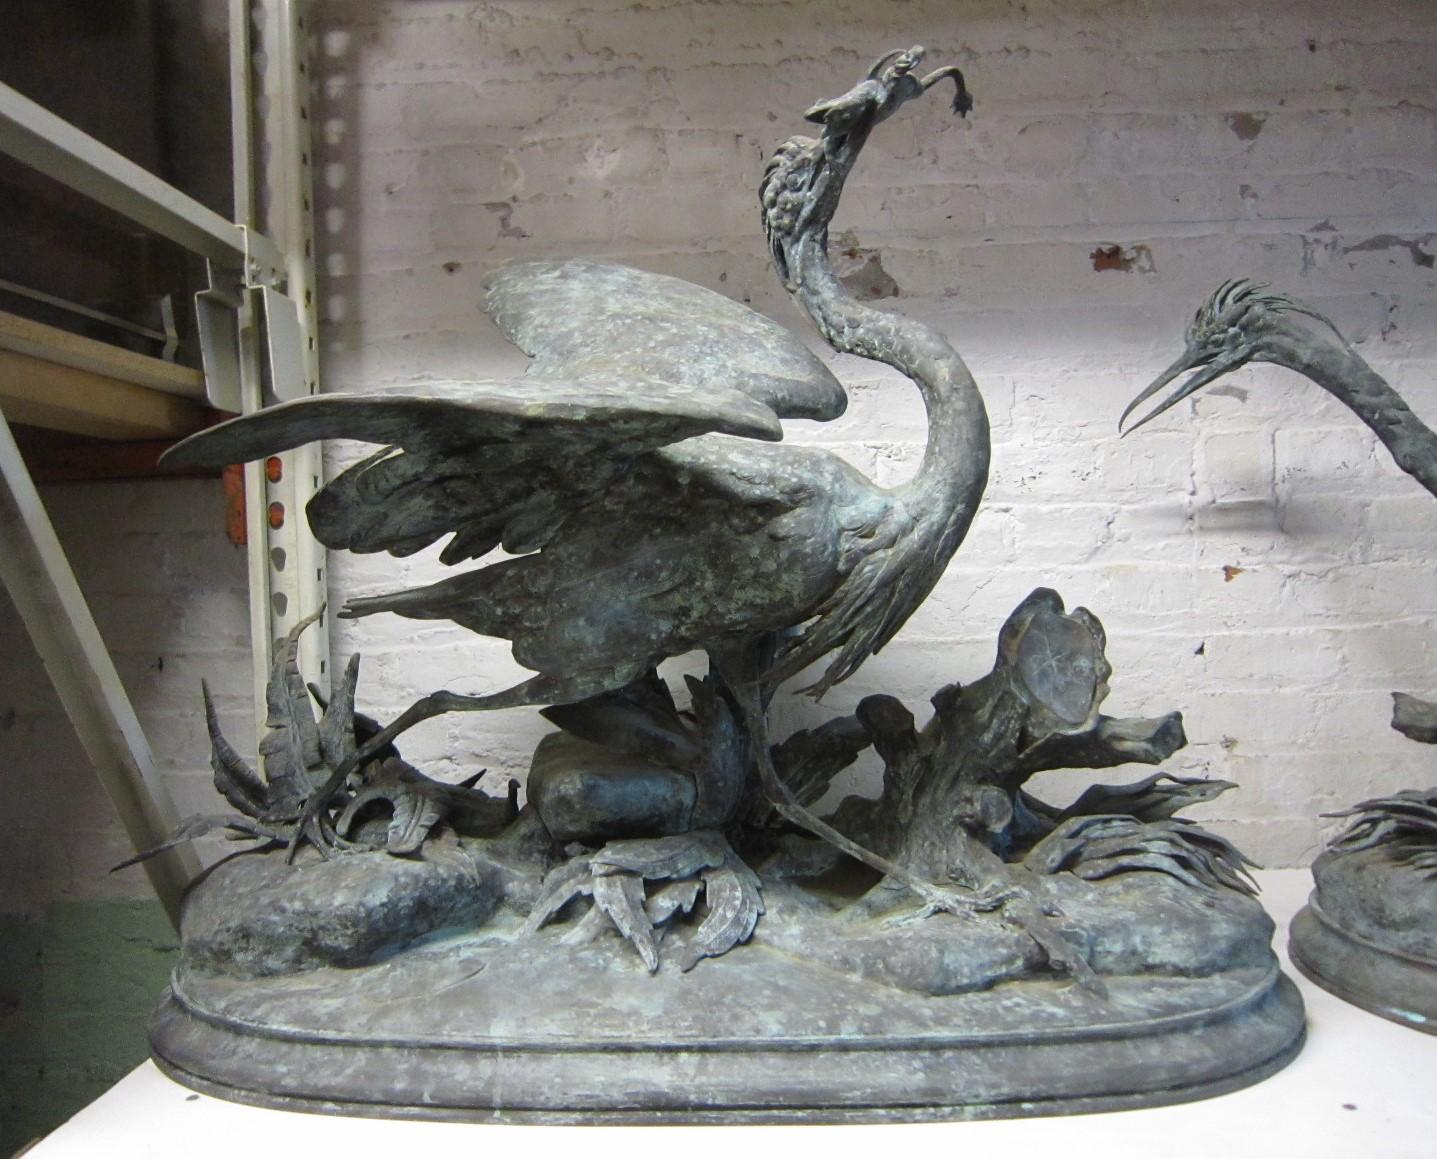 This important and unusual pair of life size French 19th century Blue Herons are realistically depicted with the two birds foraging in their natural environment. One large Heron is holding a frog in its mouth, while the other with wings flared and